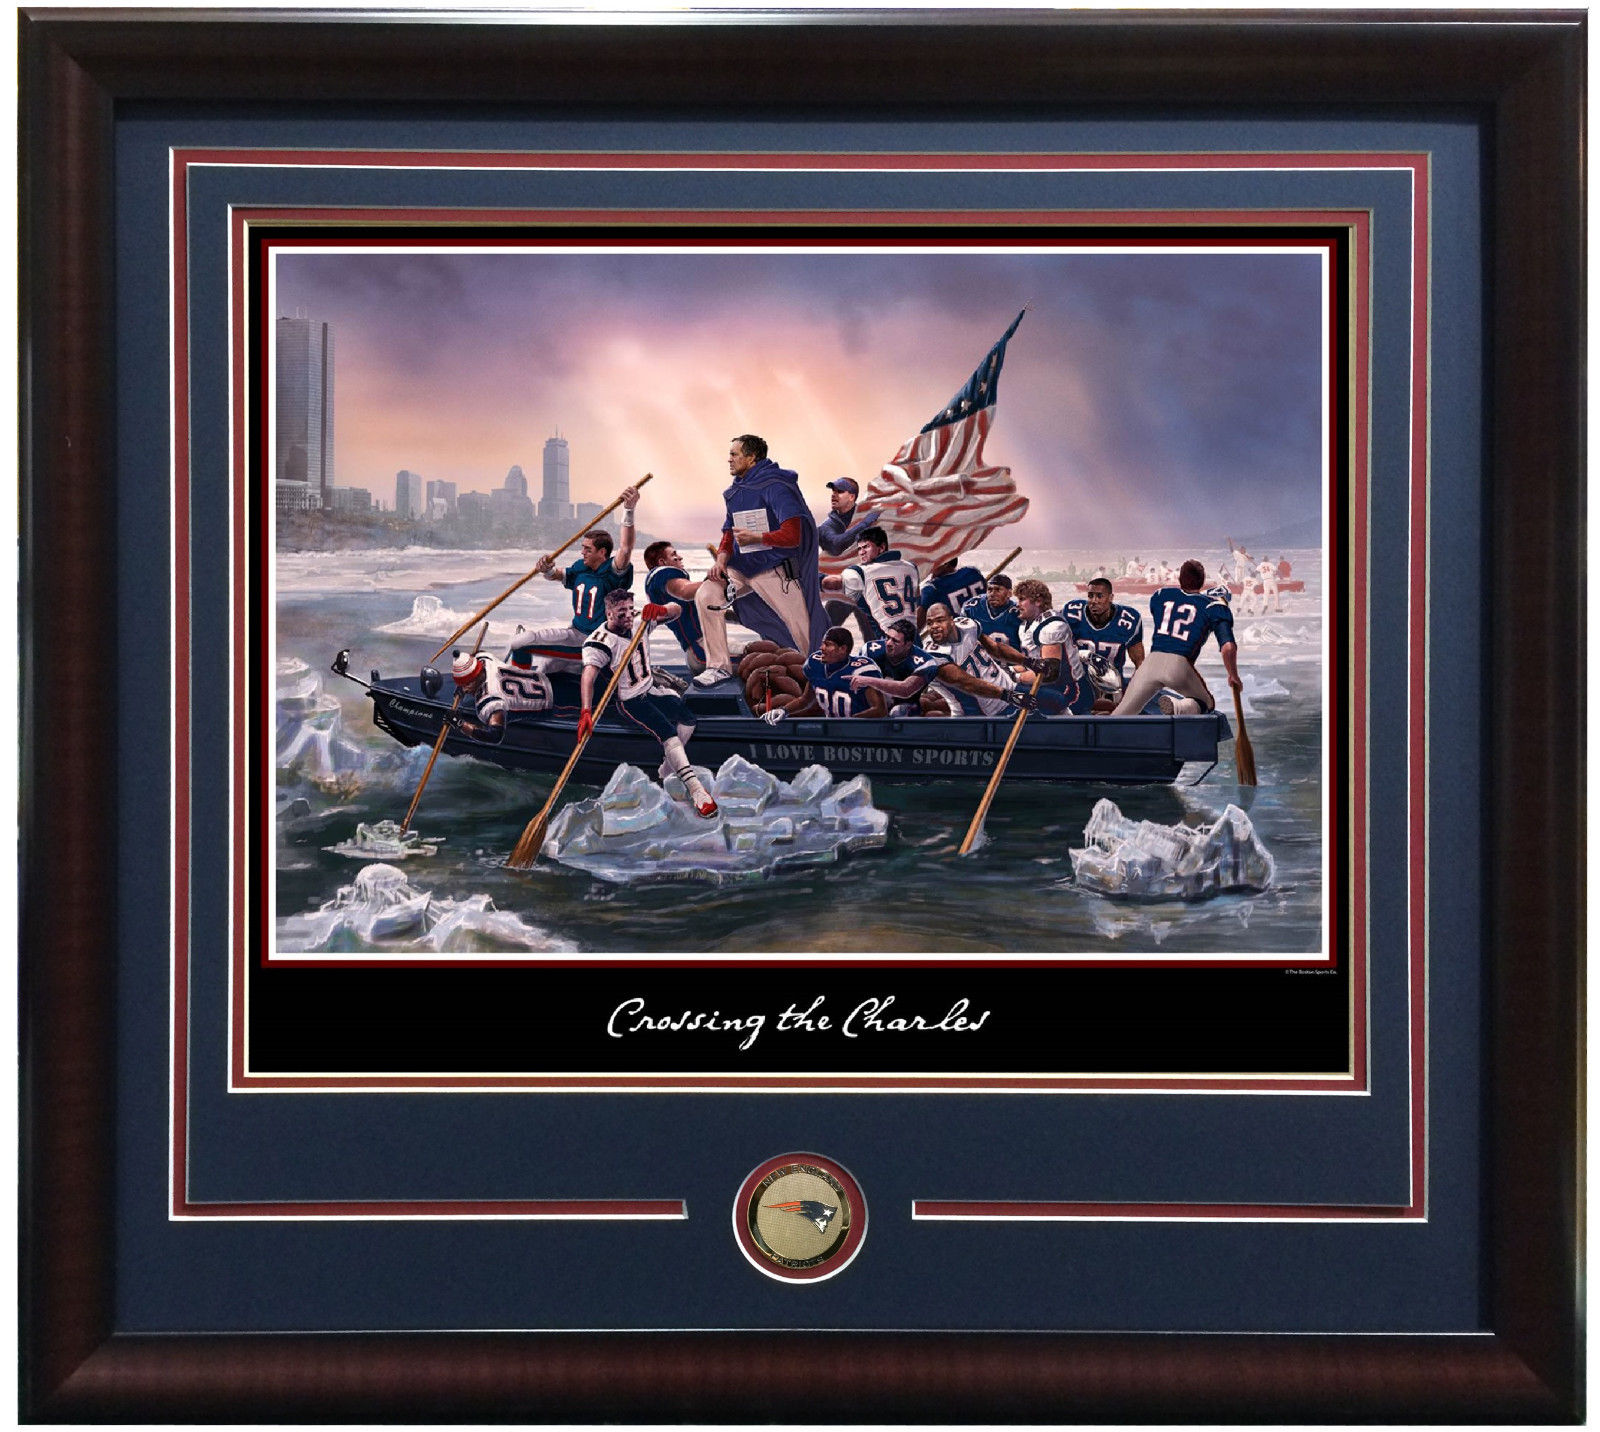 Patriots crossing the charles 16×20 lithograph photo framed coin Tom Brady MVP